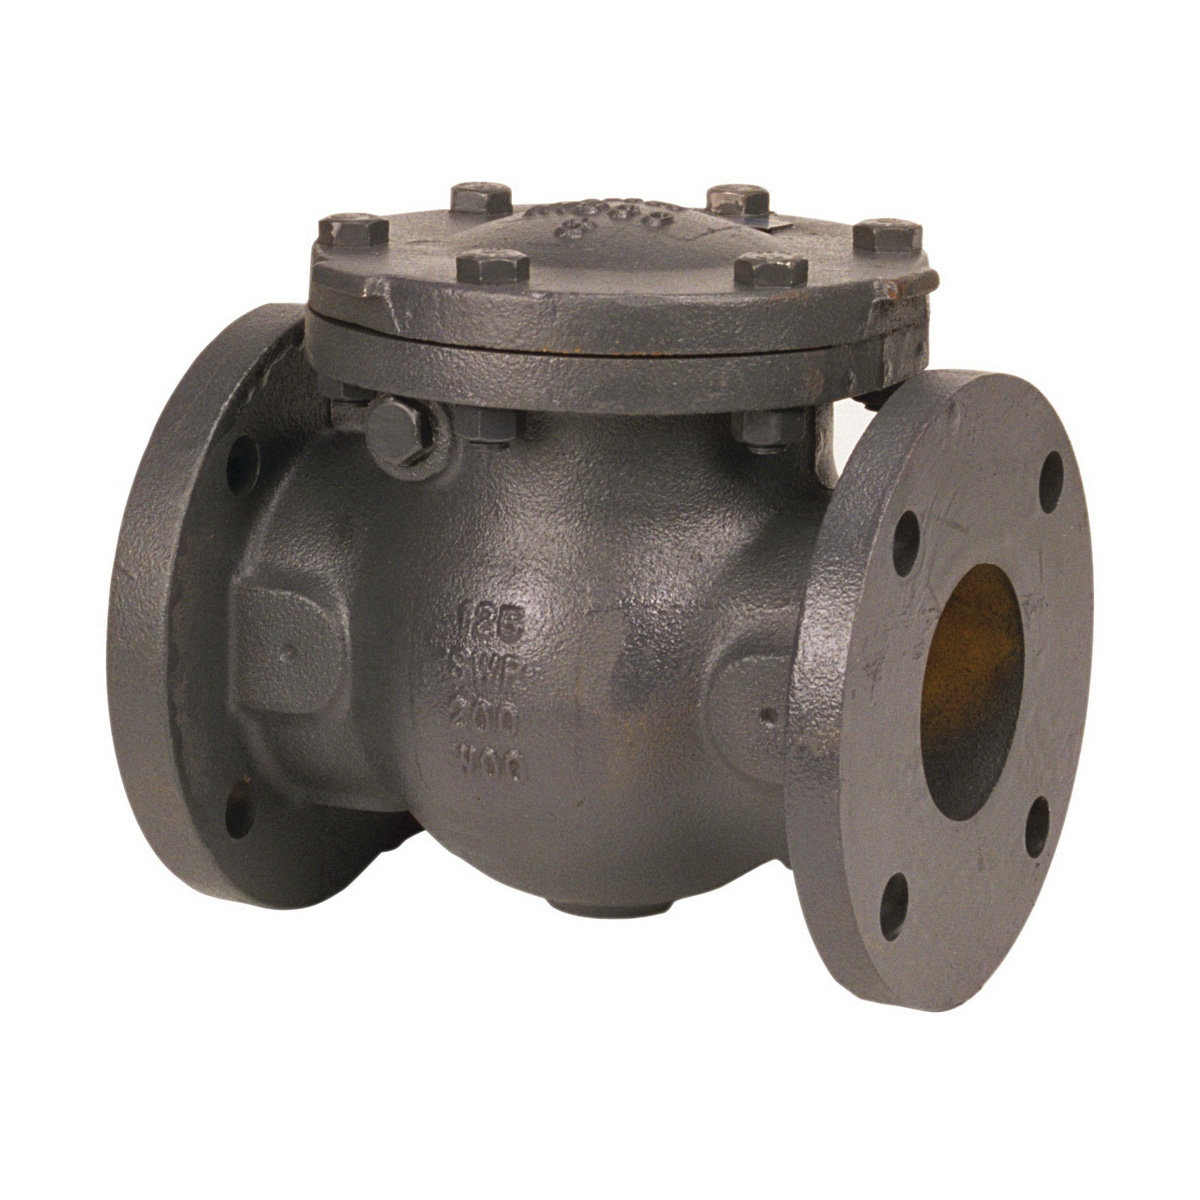 NIBCO® NHE300H F-918-B Swing Check Valve, 4 in Nominal, Flanged End Style, 125 lb, Cast Iron Body, Domestic